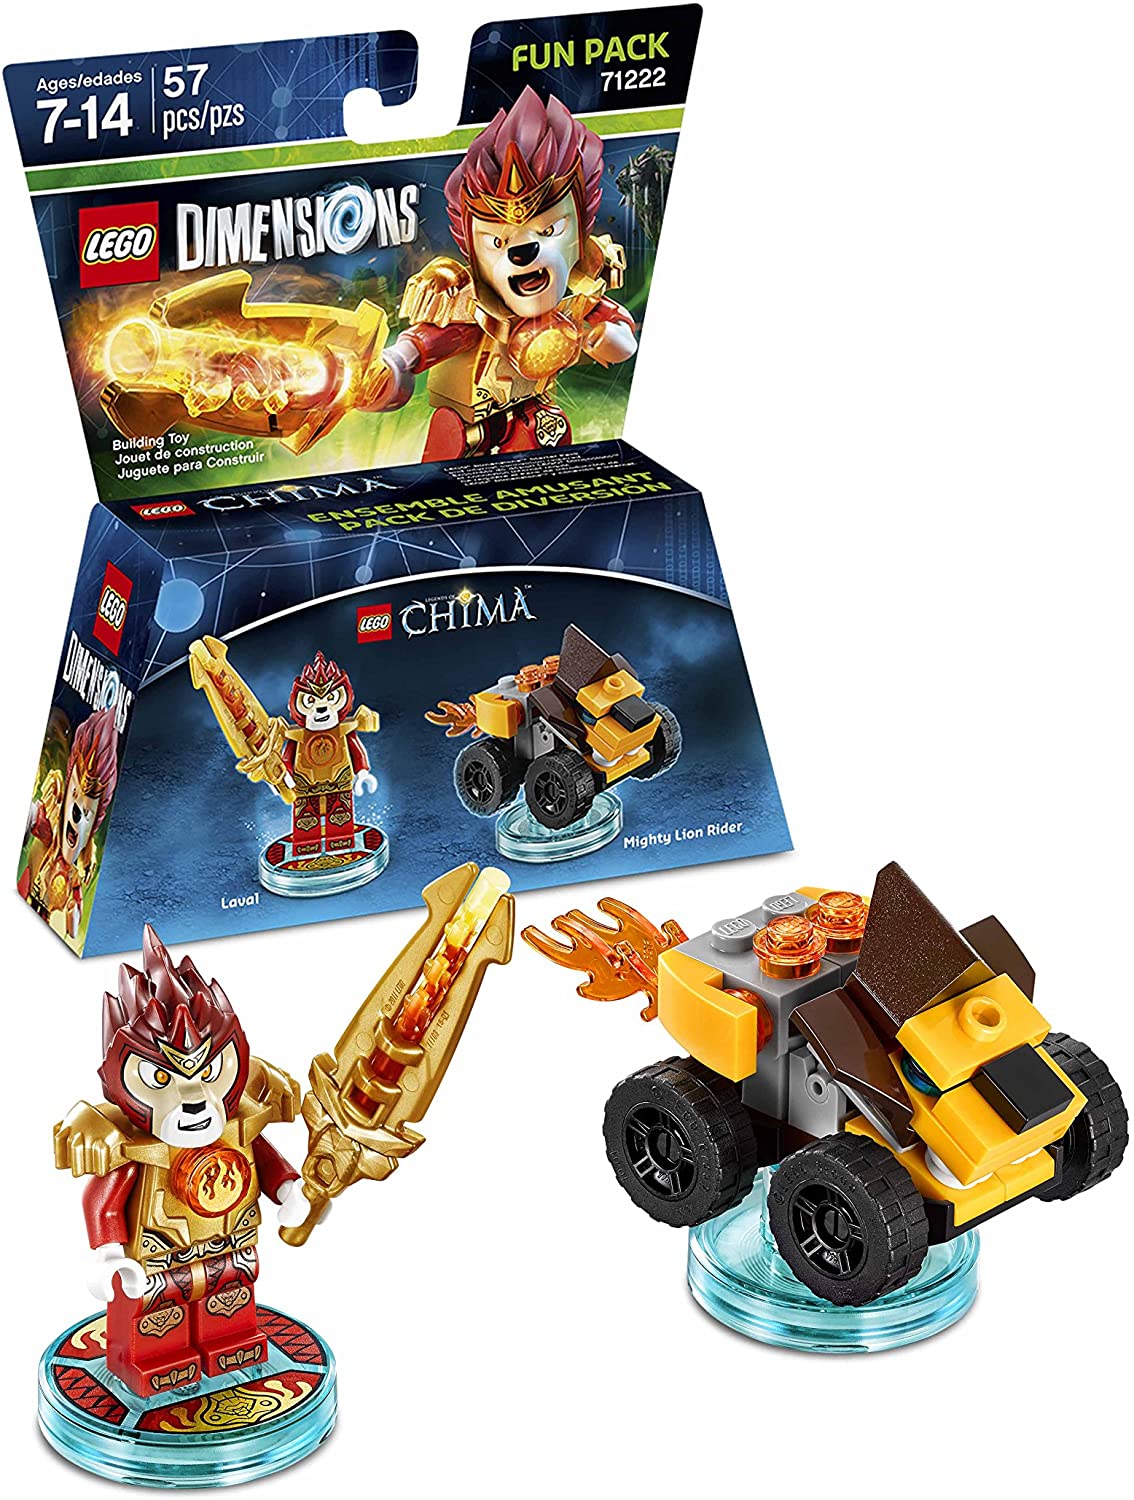 LEGO Dimensions - Fun Pack (71222) - LEGO Chima (Laval, Mighty Lion Rider)